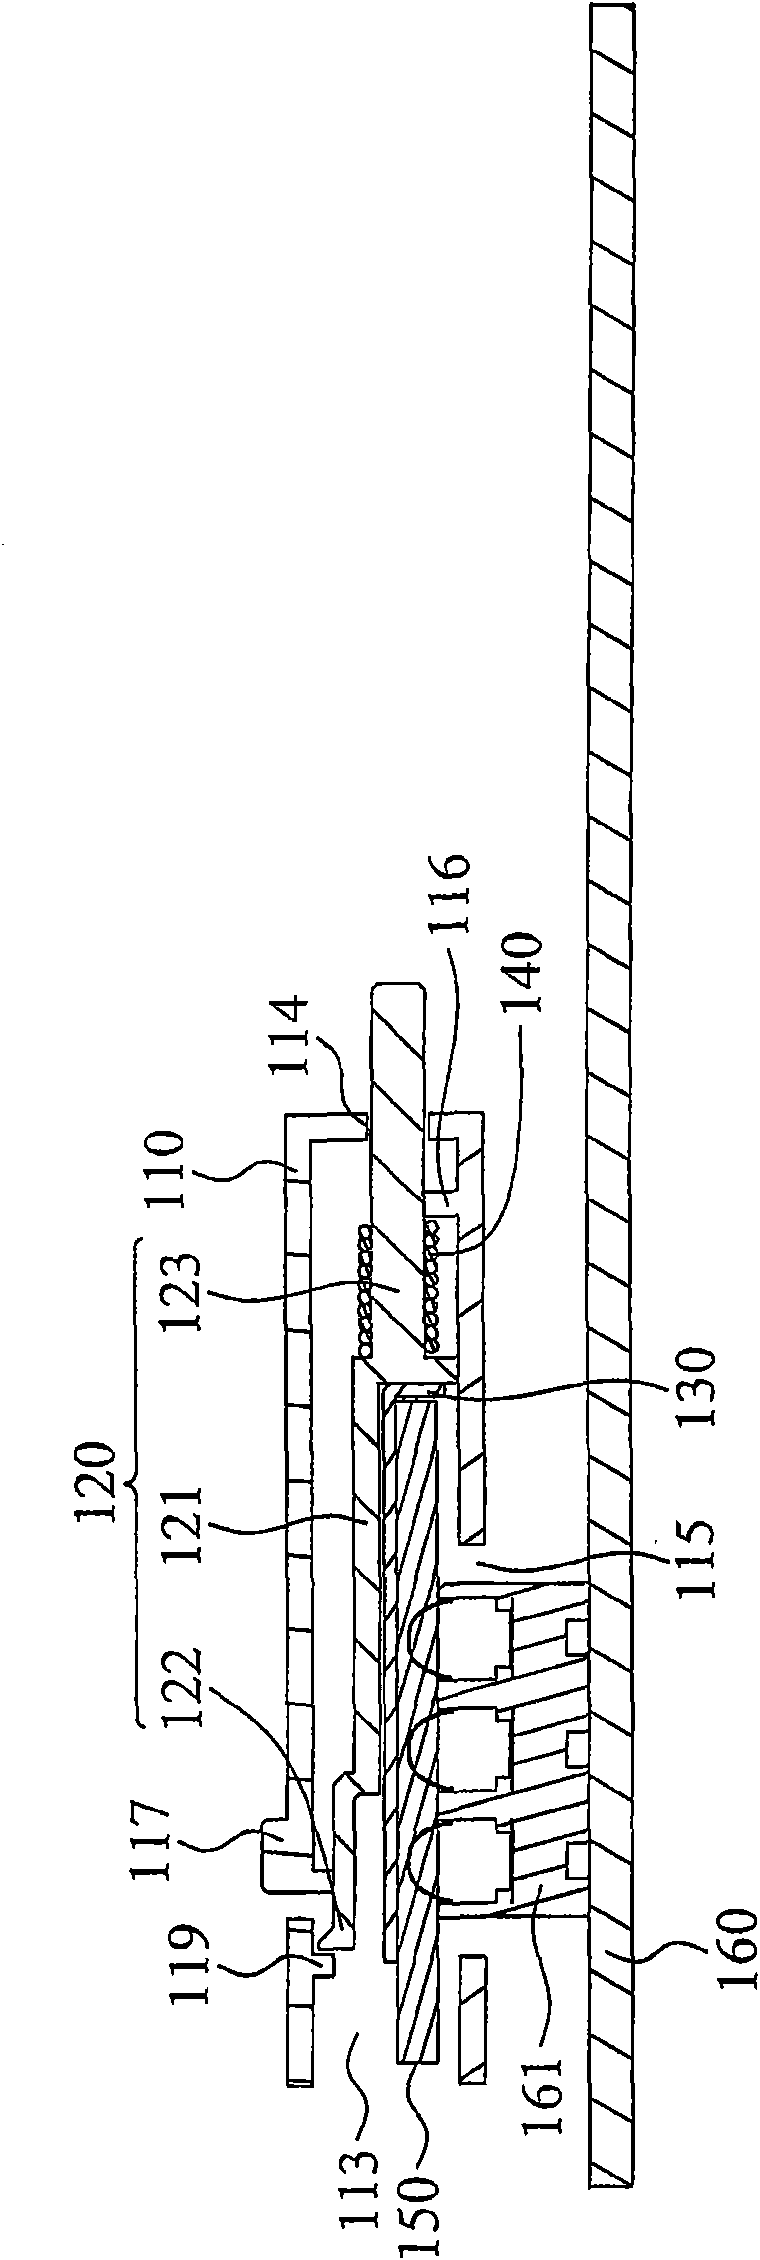 Electronic device and card fixing module